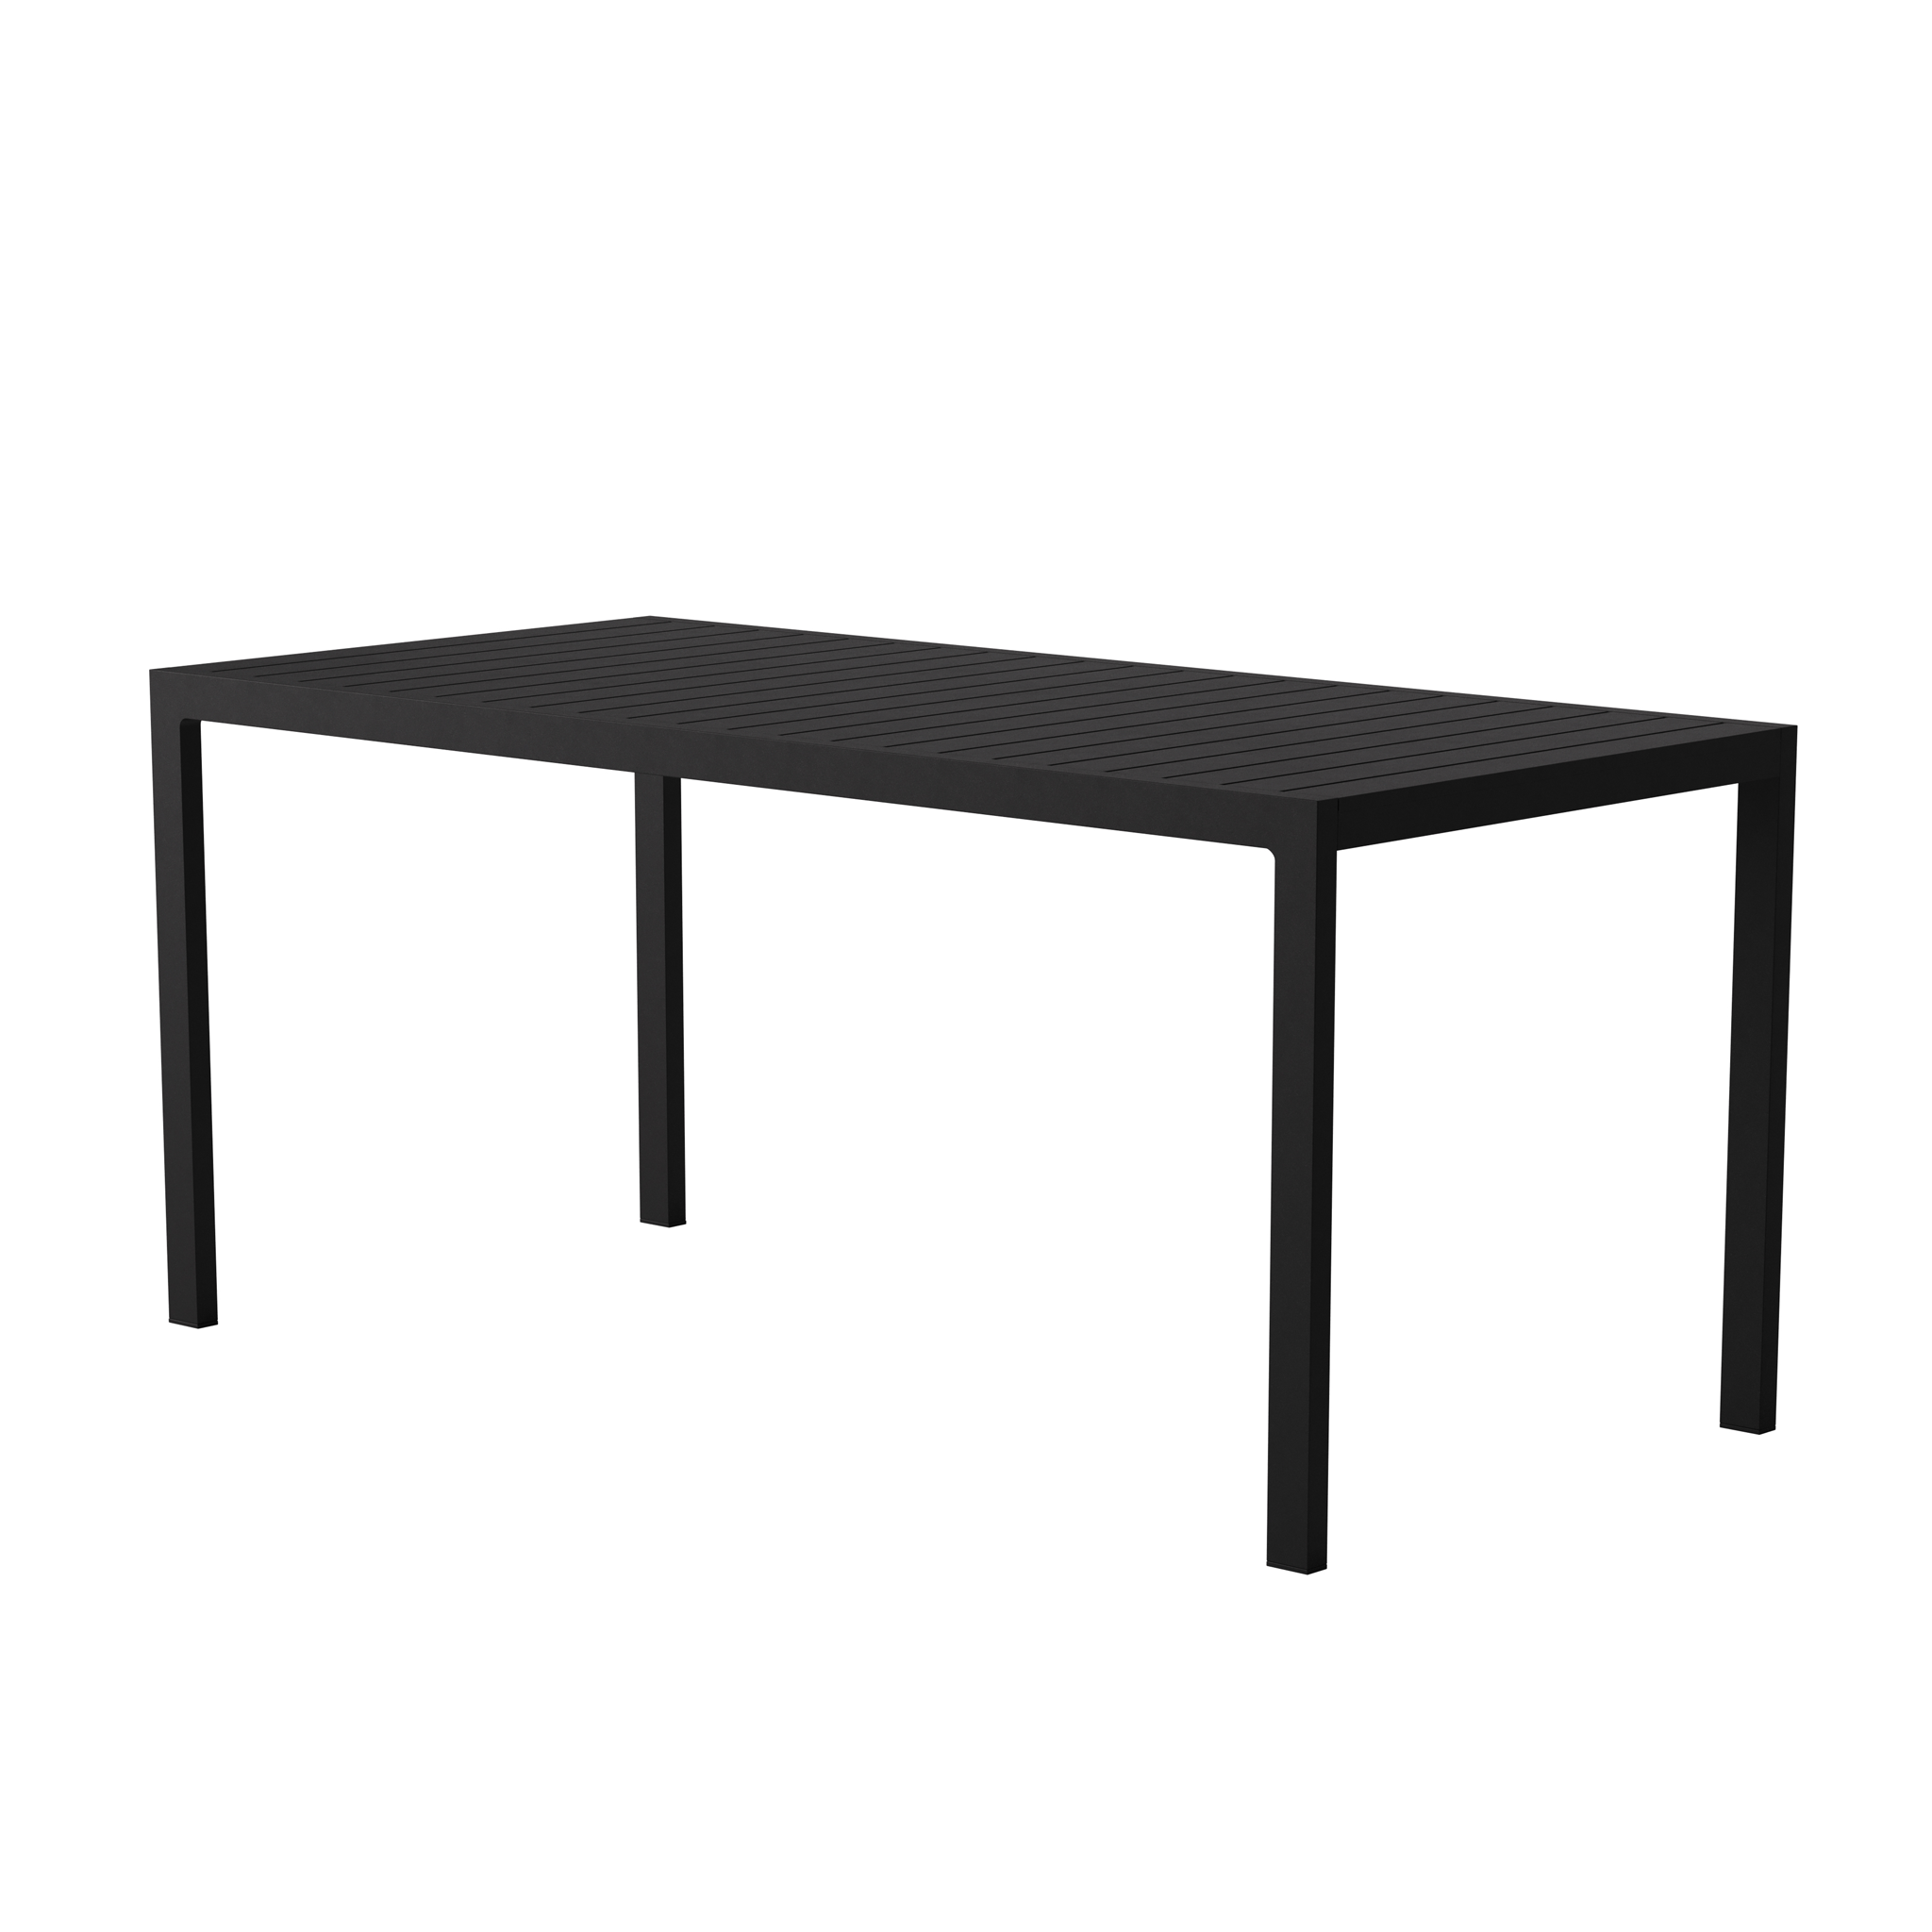 Clearance Eos Rectangular Table / Black by Case